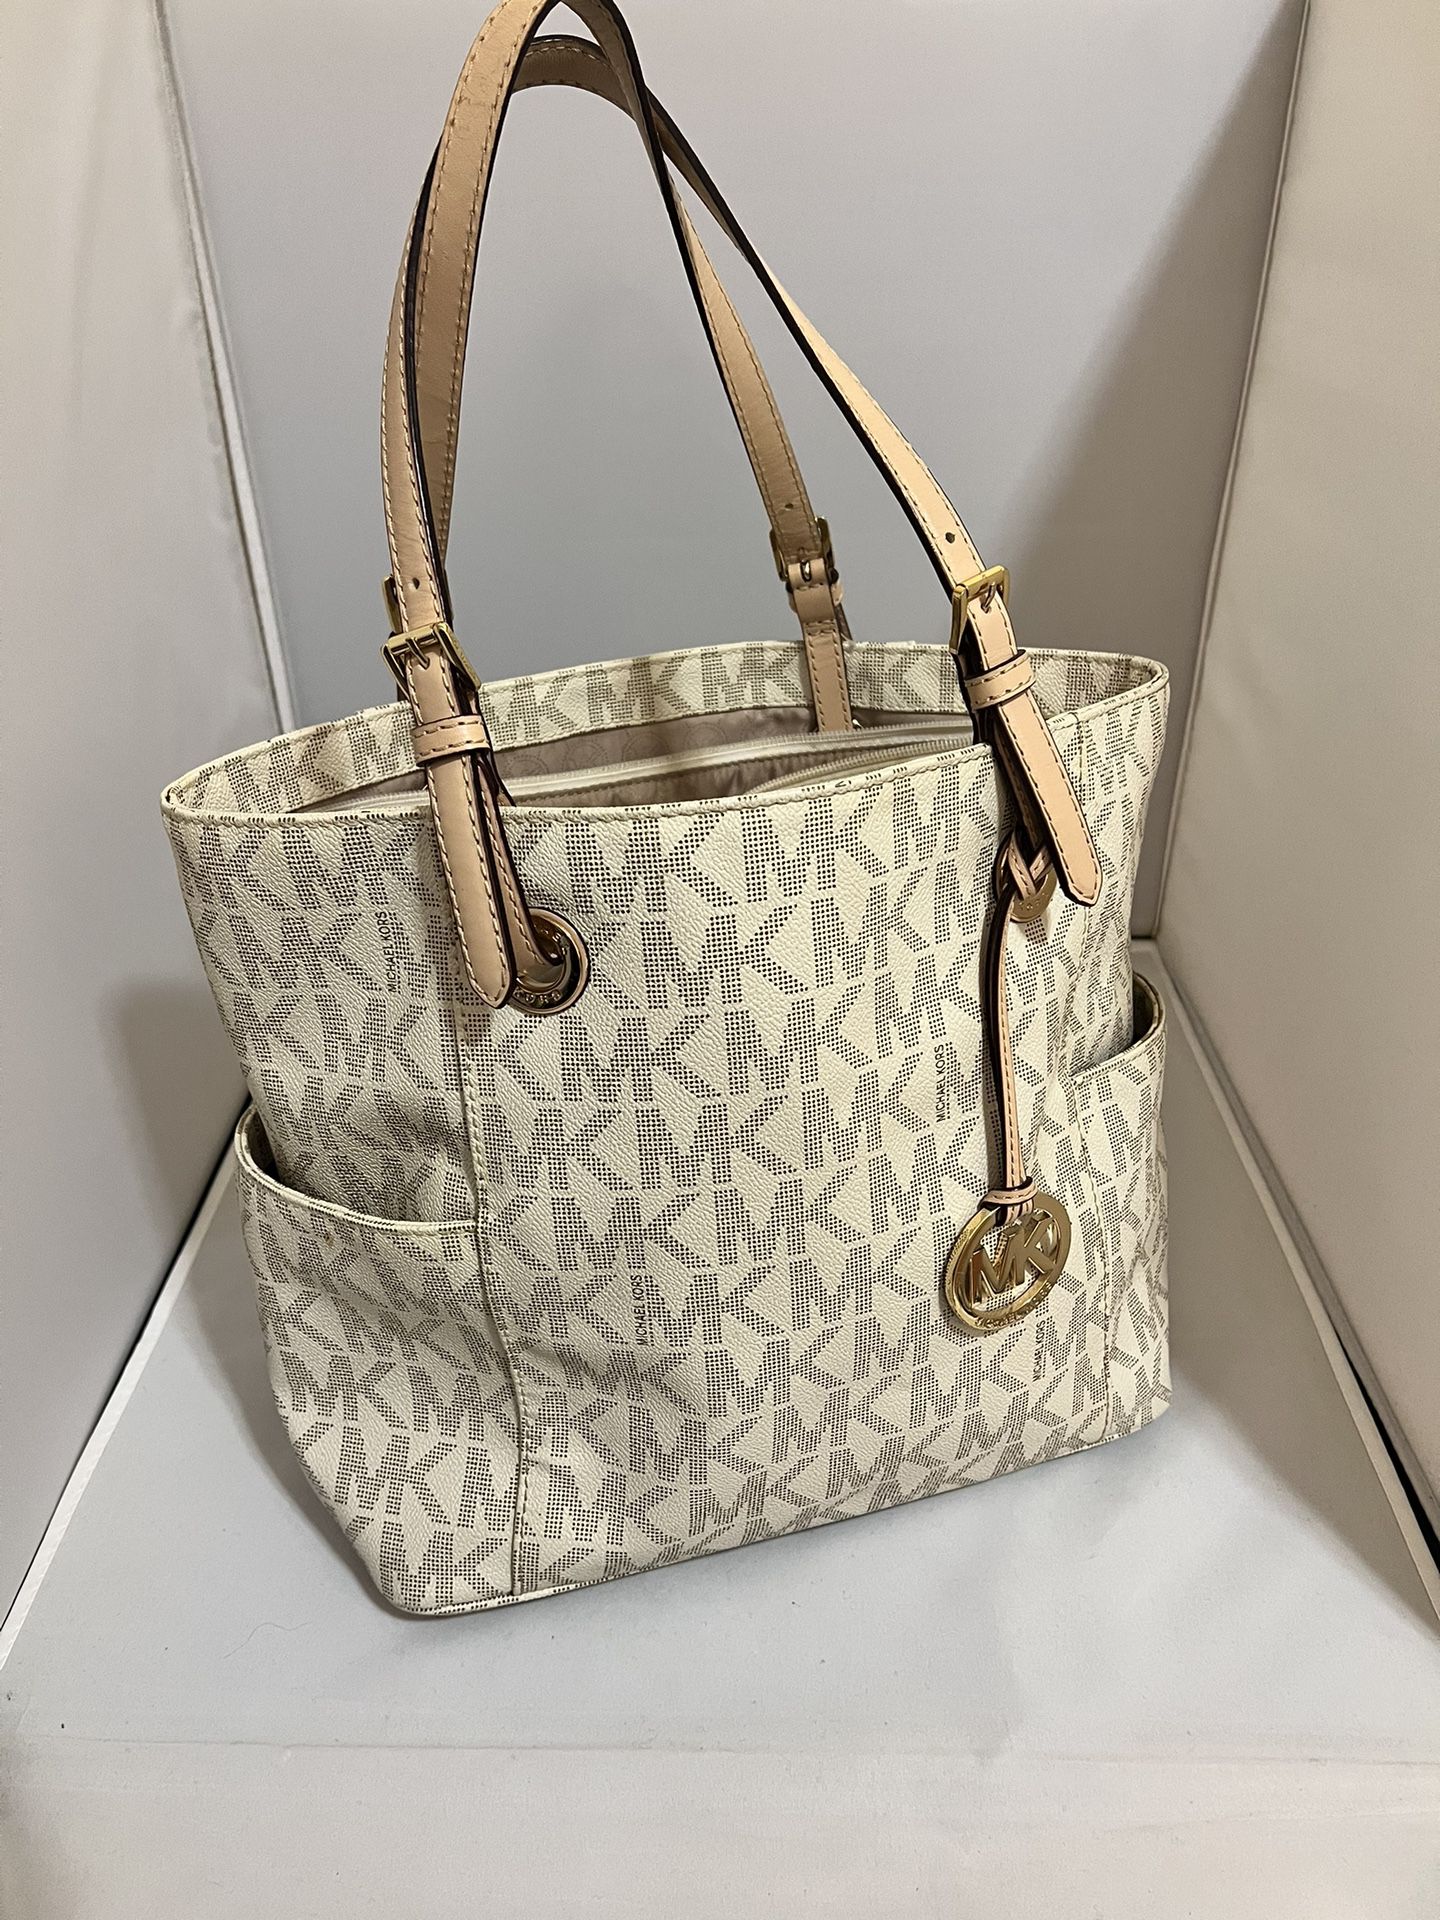 Michael Jet shoulder tote work office bag 15”W 10”H x 6”D white cream with gold logo Luxury Fashion Bag for Sale in Torrance, CA - OfferUp